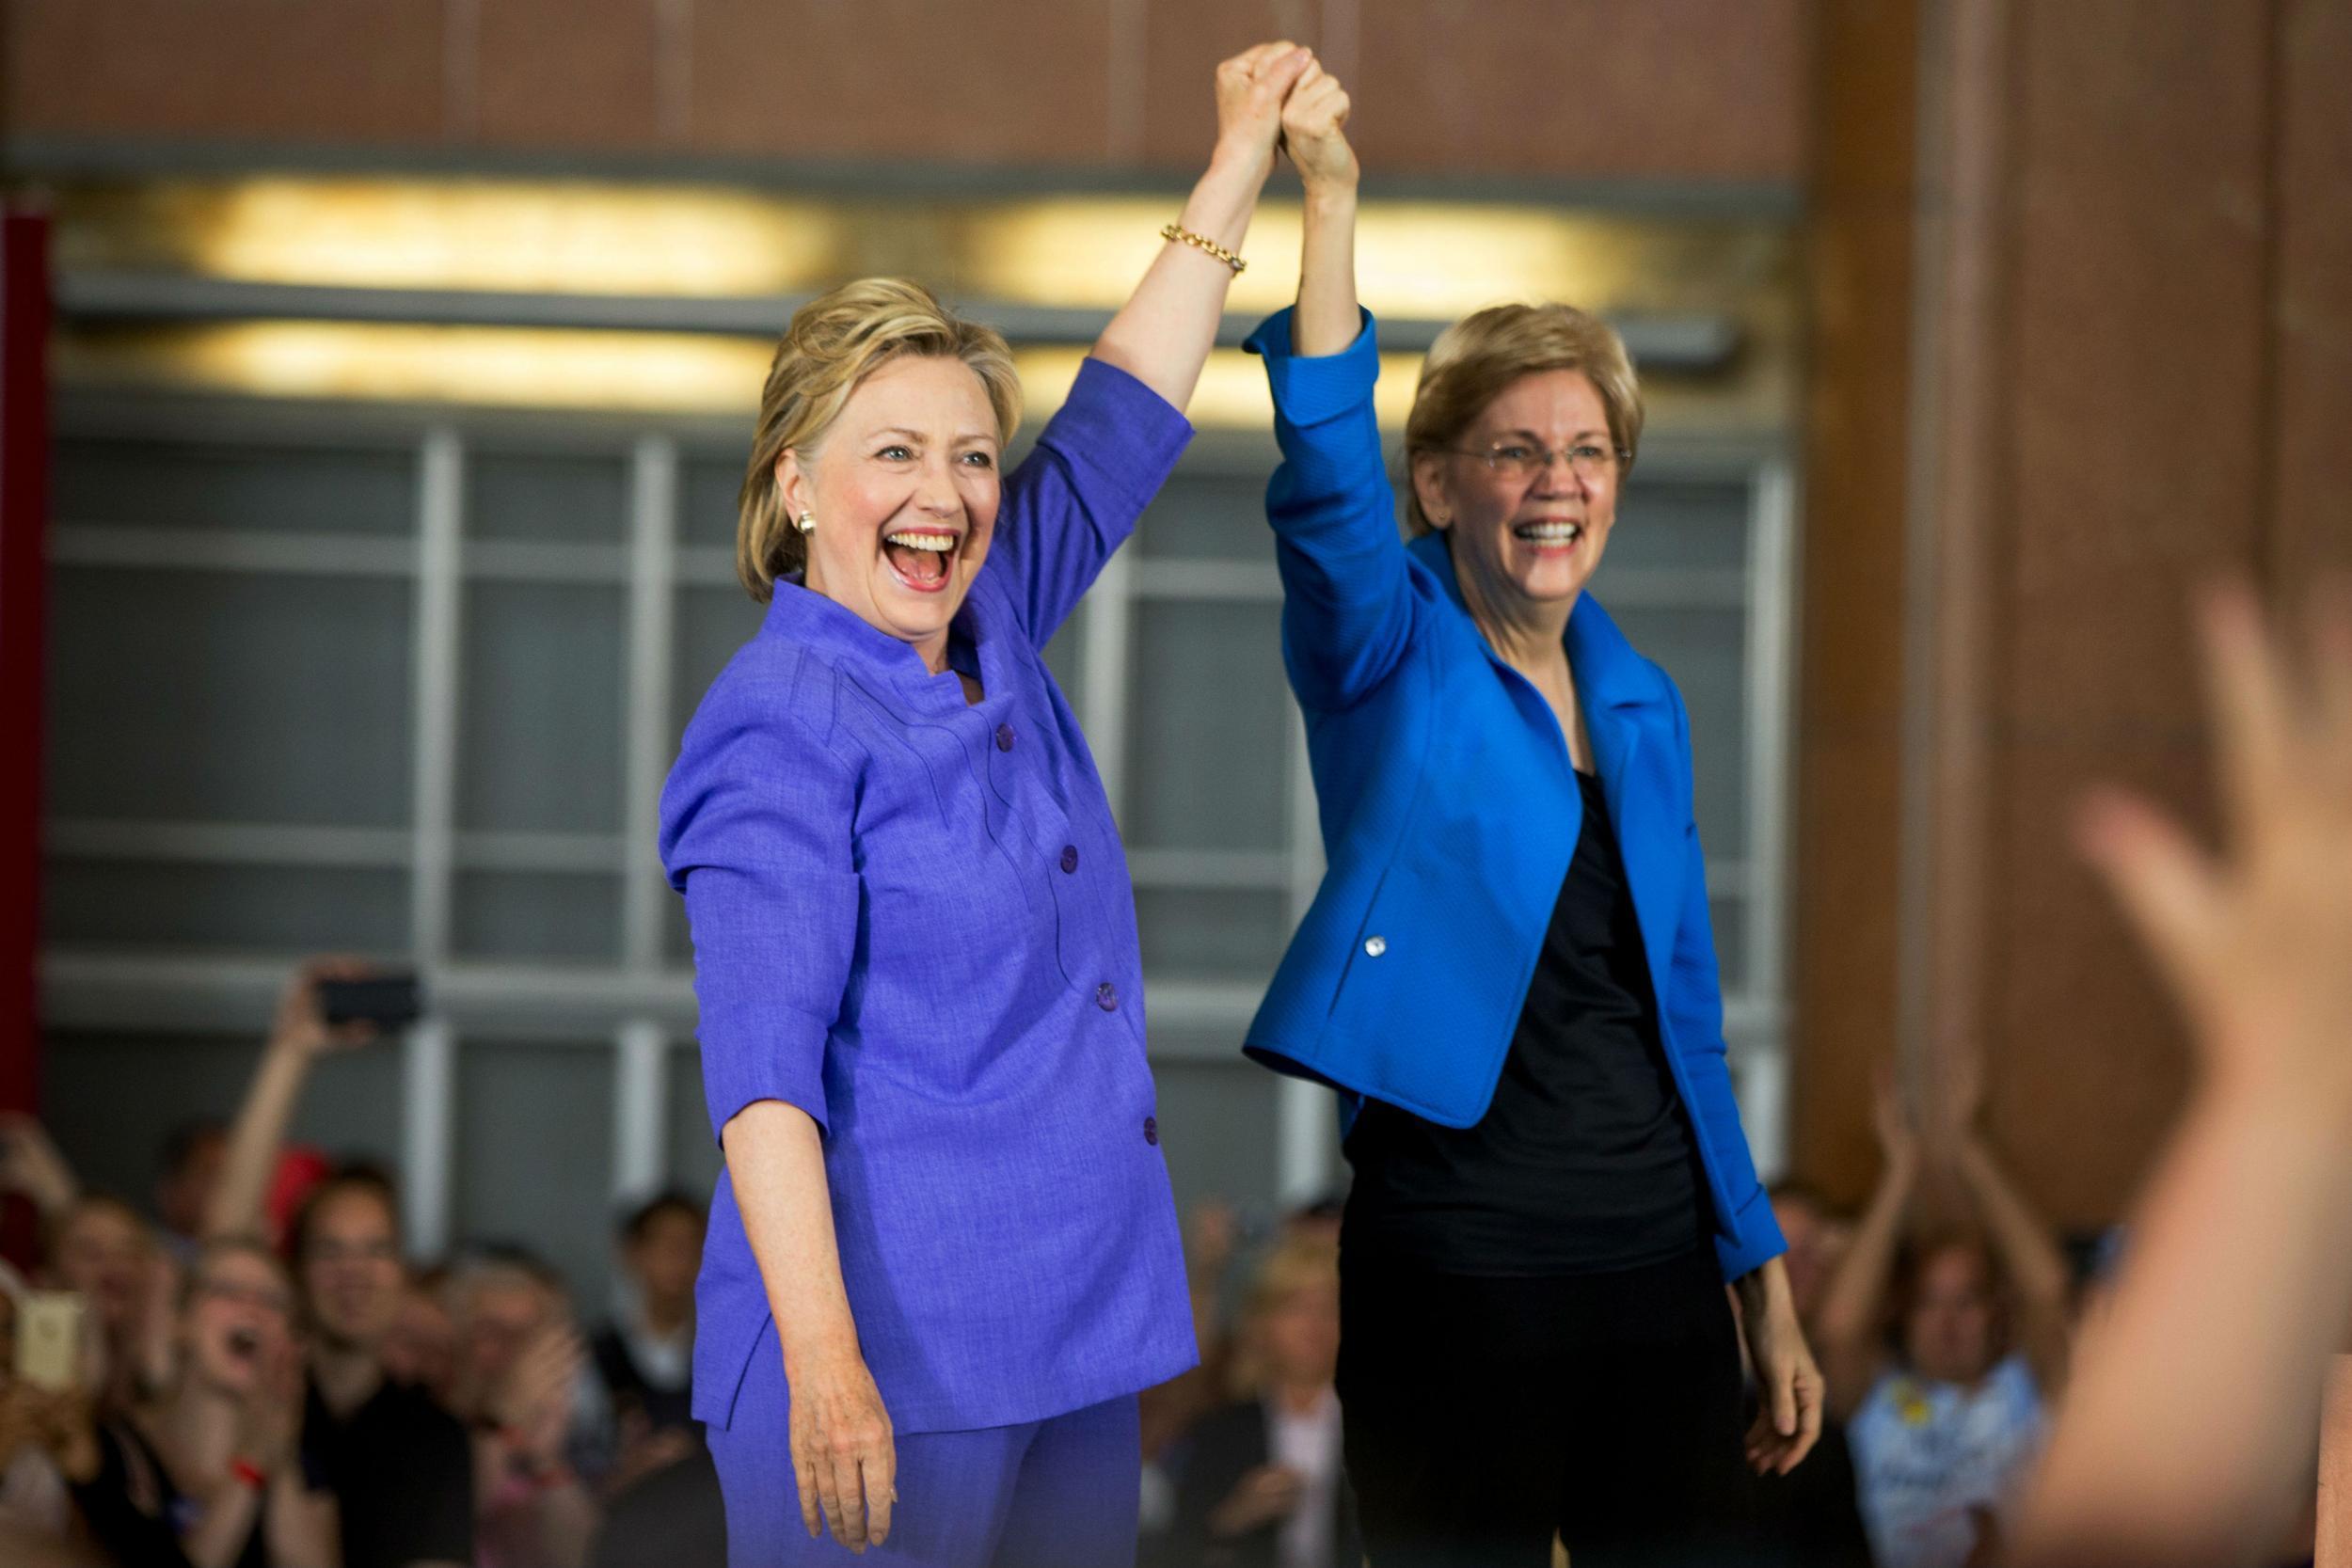 Is senator Warren about to be appointed as potential vice president?